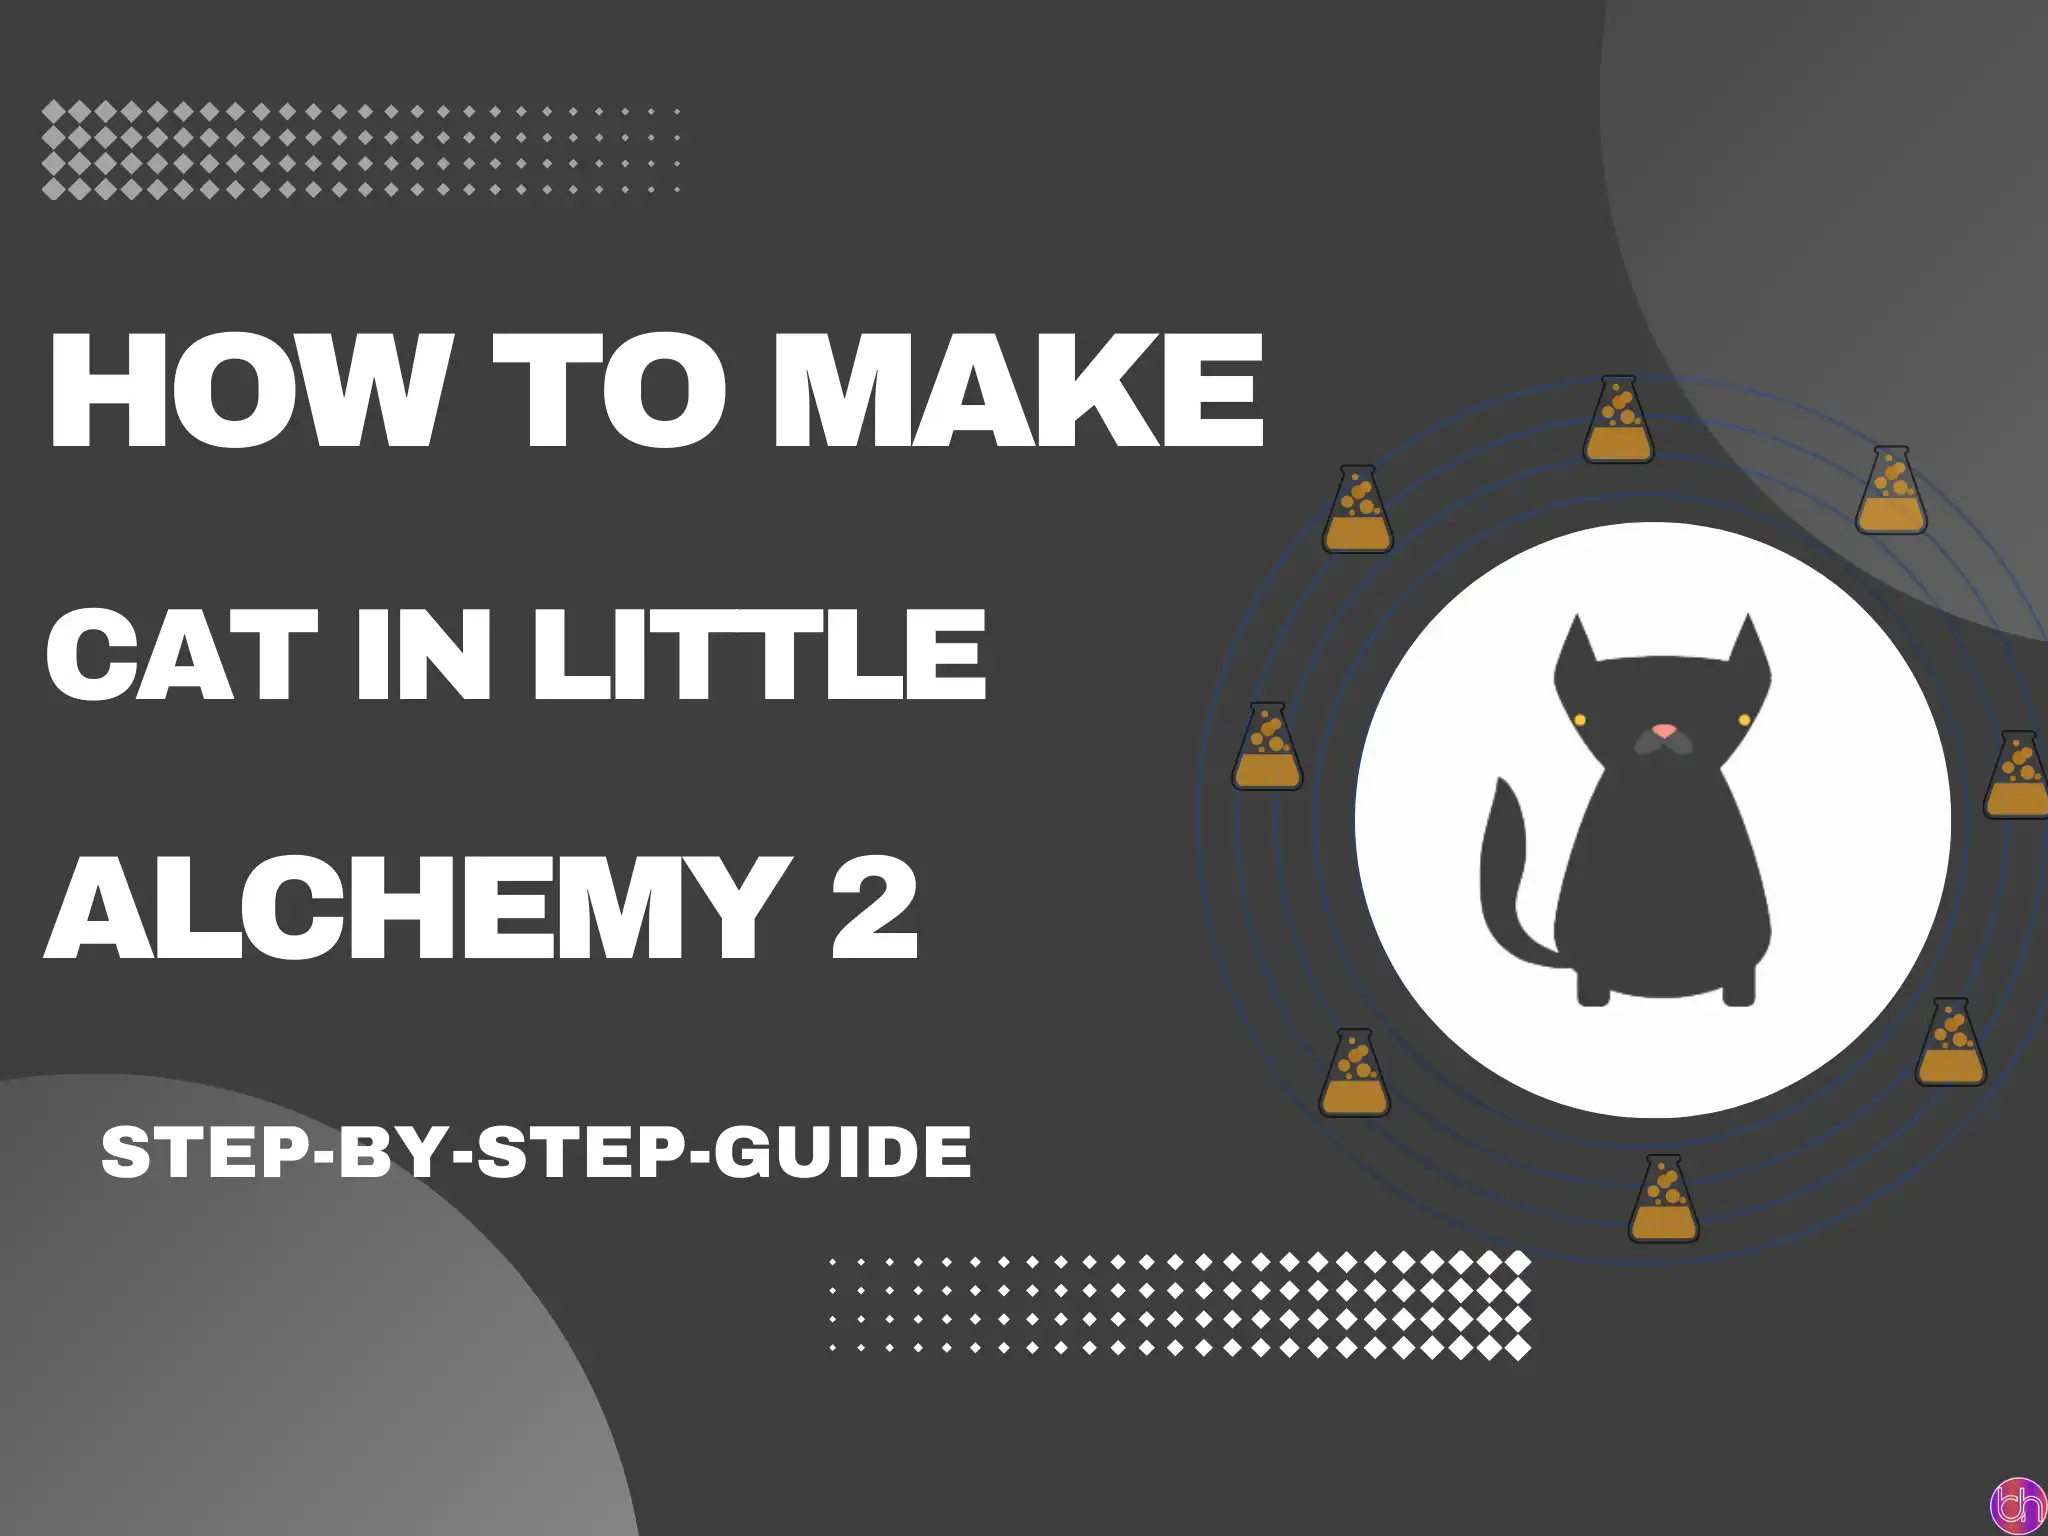 How to make Cat in little alchemy 2